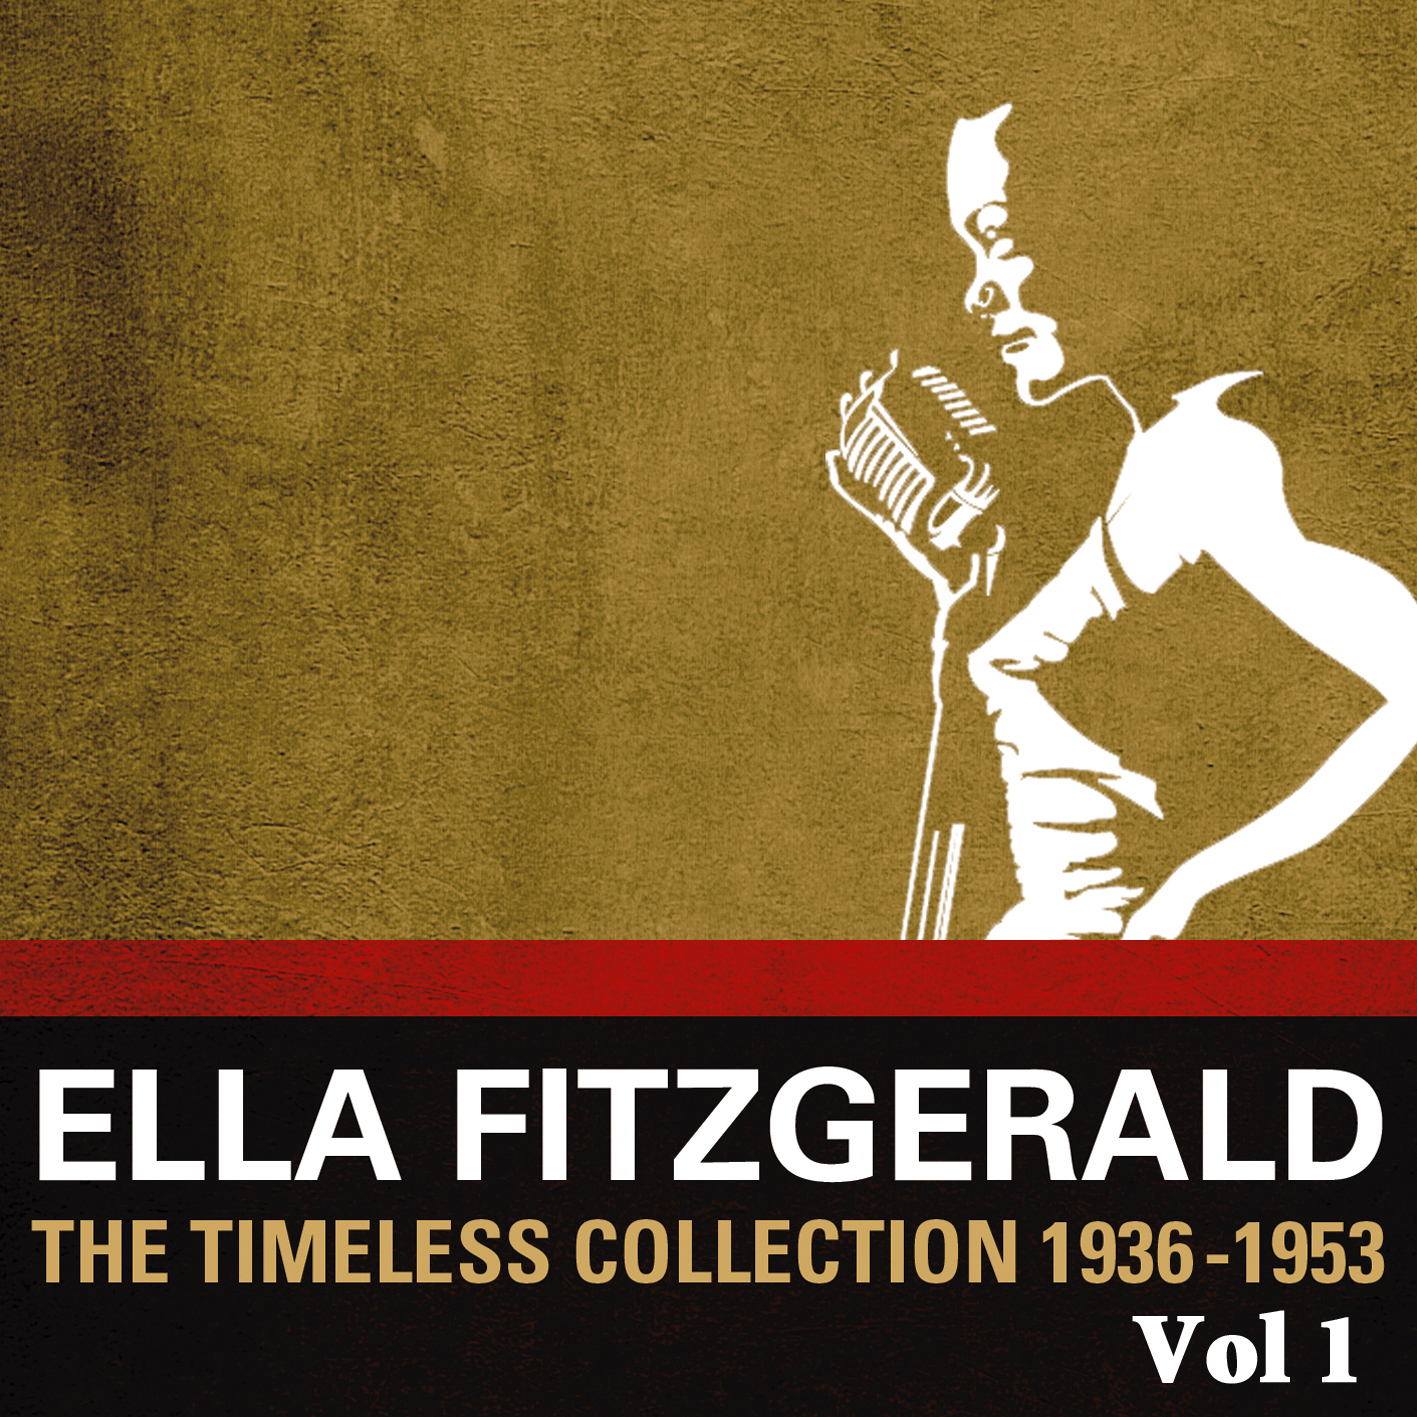 Ella Fitzgerald The Timeless Collection 1936 - 1953 Vol.1